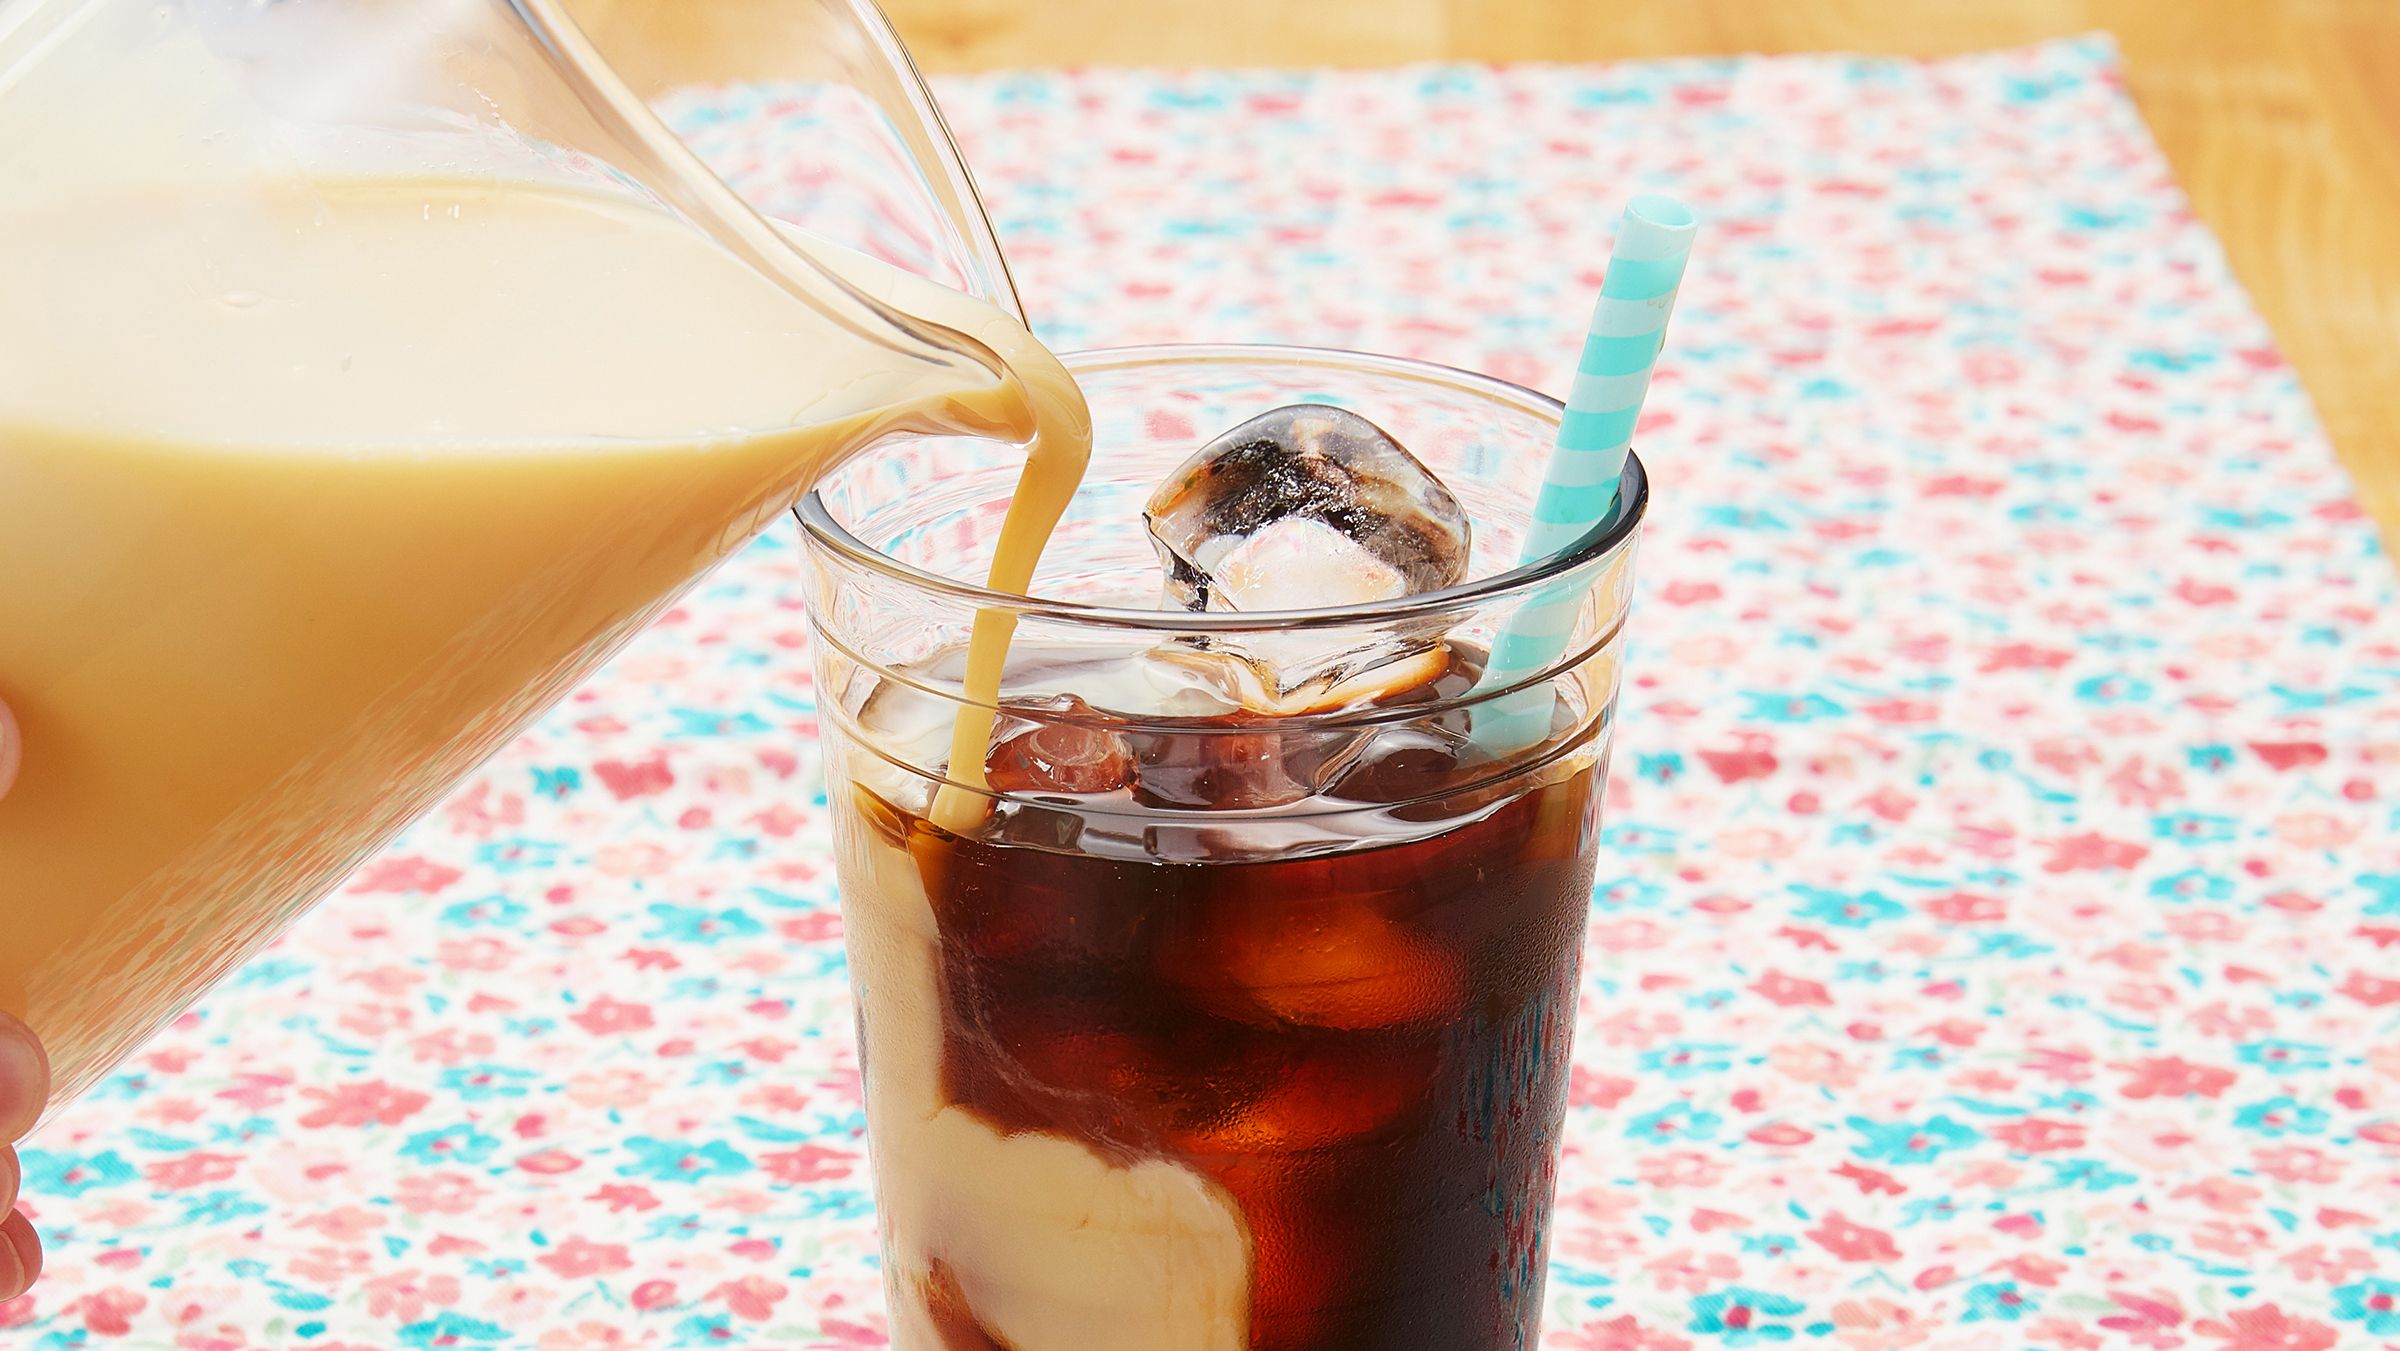 11 items that will take your homemade iced coffee game to the next